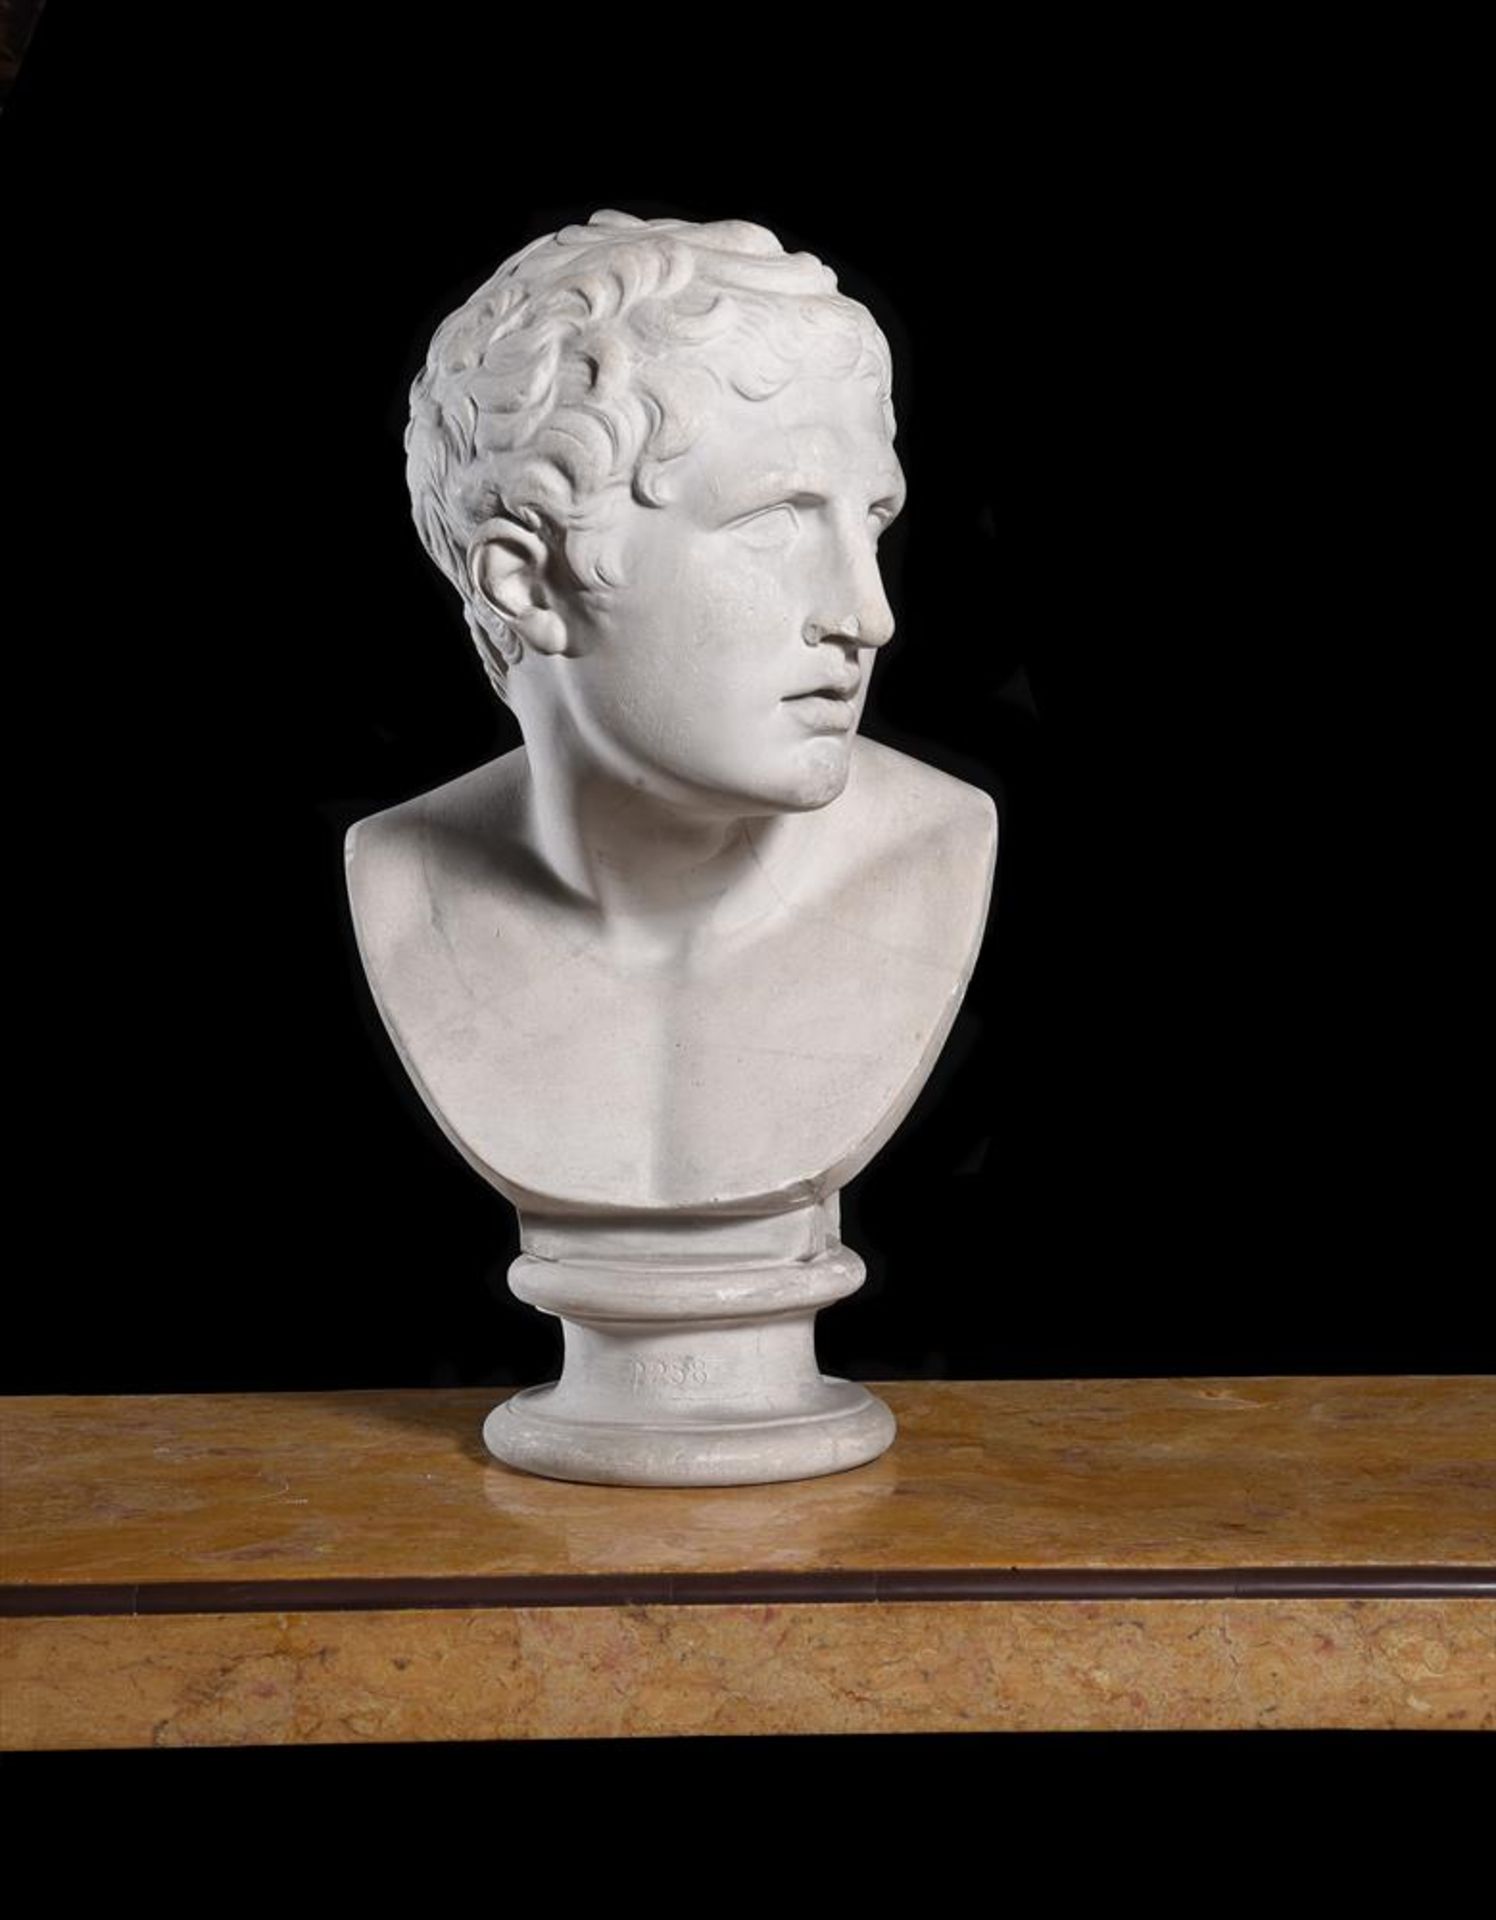 A PLASTER BUST OF A 'HEROIC HEAD', BY DOMENICO BRUCCIANI & CO, CIRCA 1900